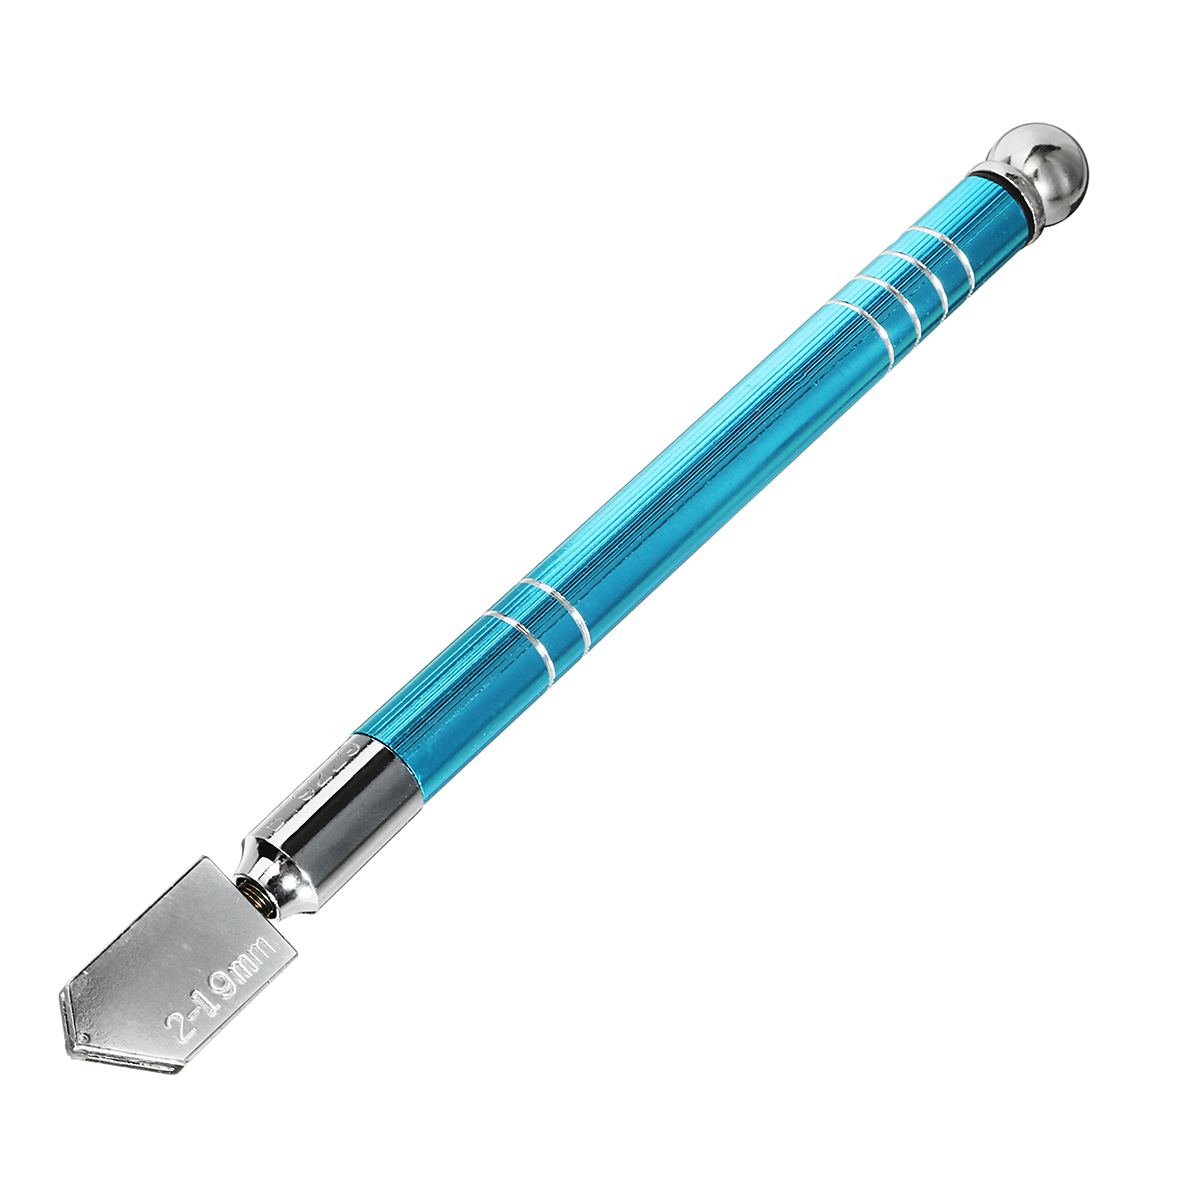 Portable-Glass-Cutter-Anti-Slip-Handle-Diamond-Minerals-Tipped-Glass-Cutter-for-2-19mm-Glass-1285318-8